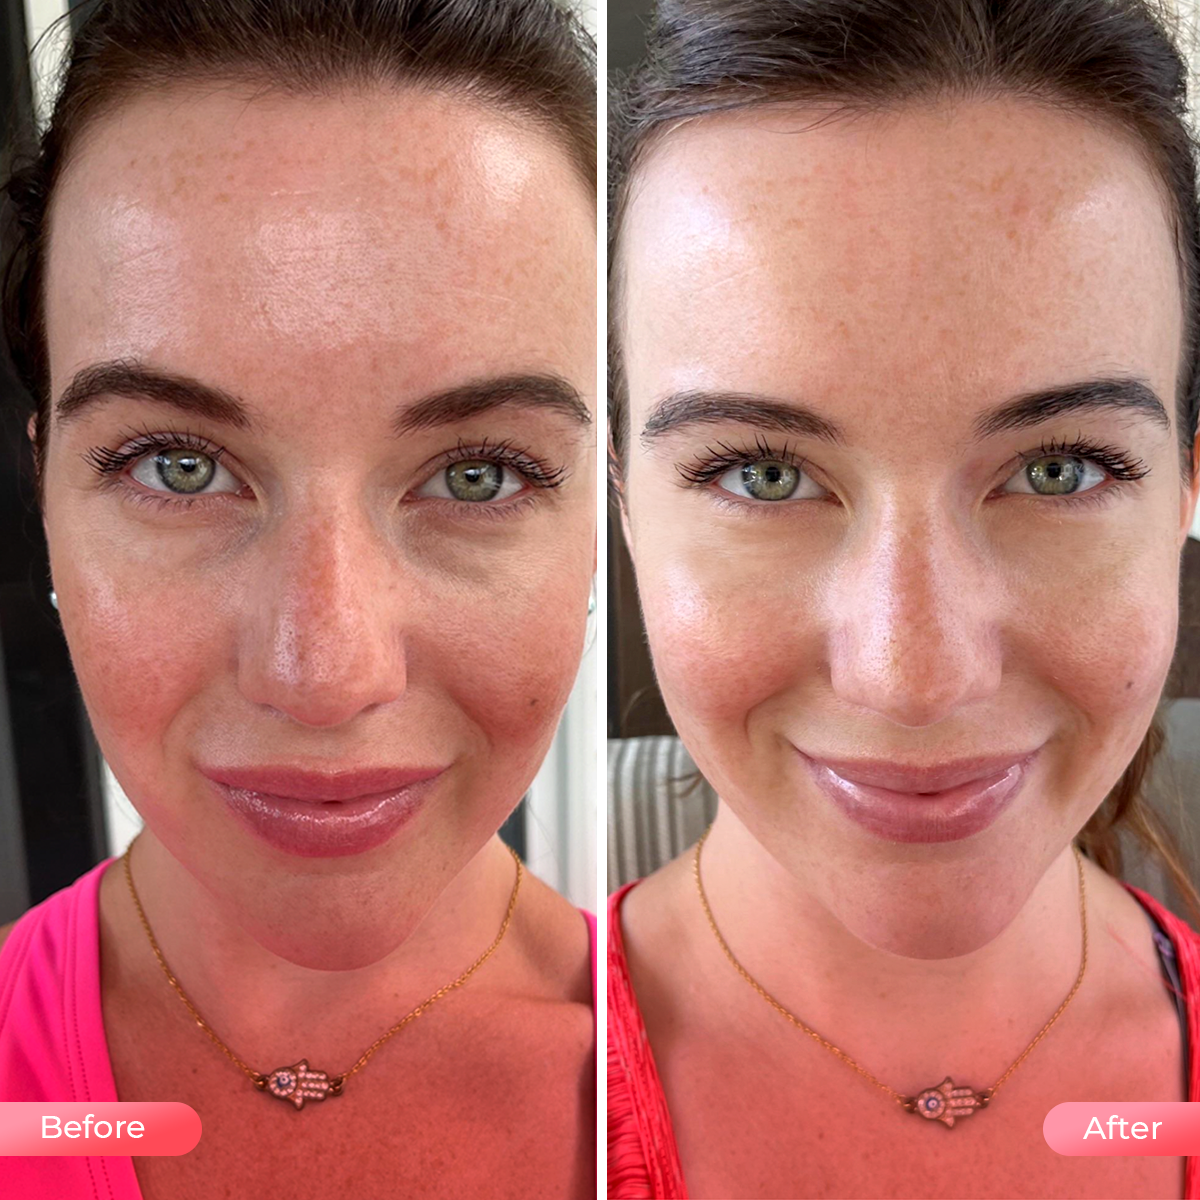 Aduro Facial Mask Before and after looking amazing